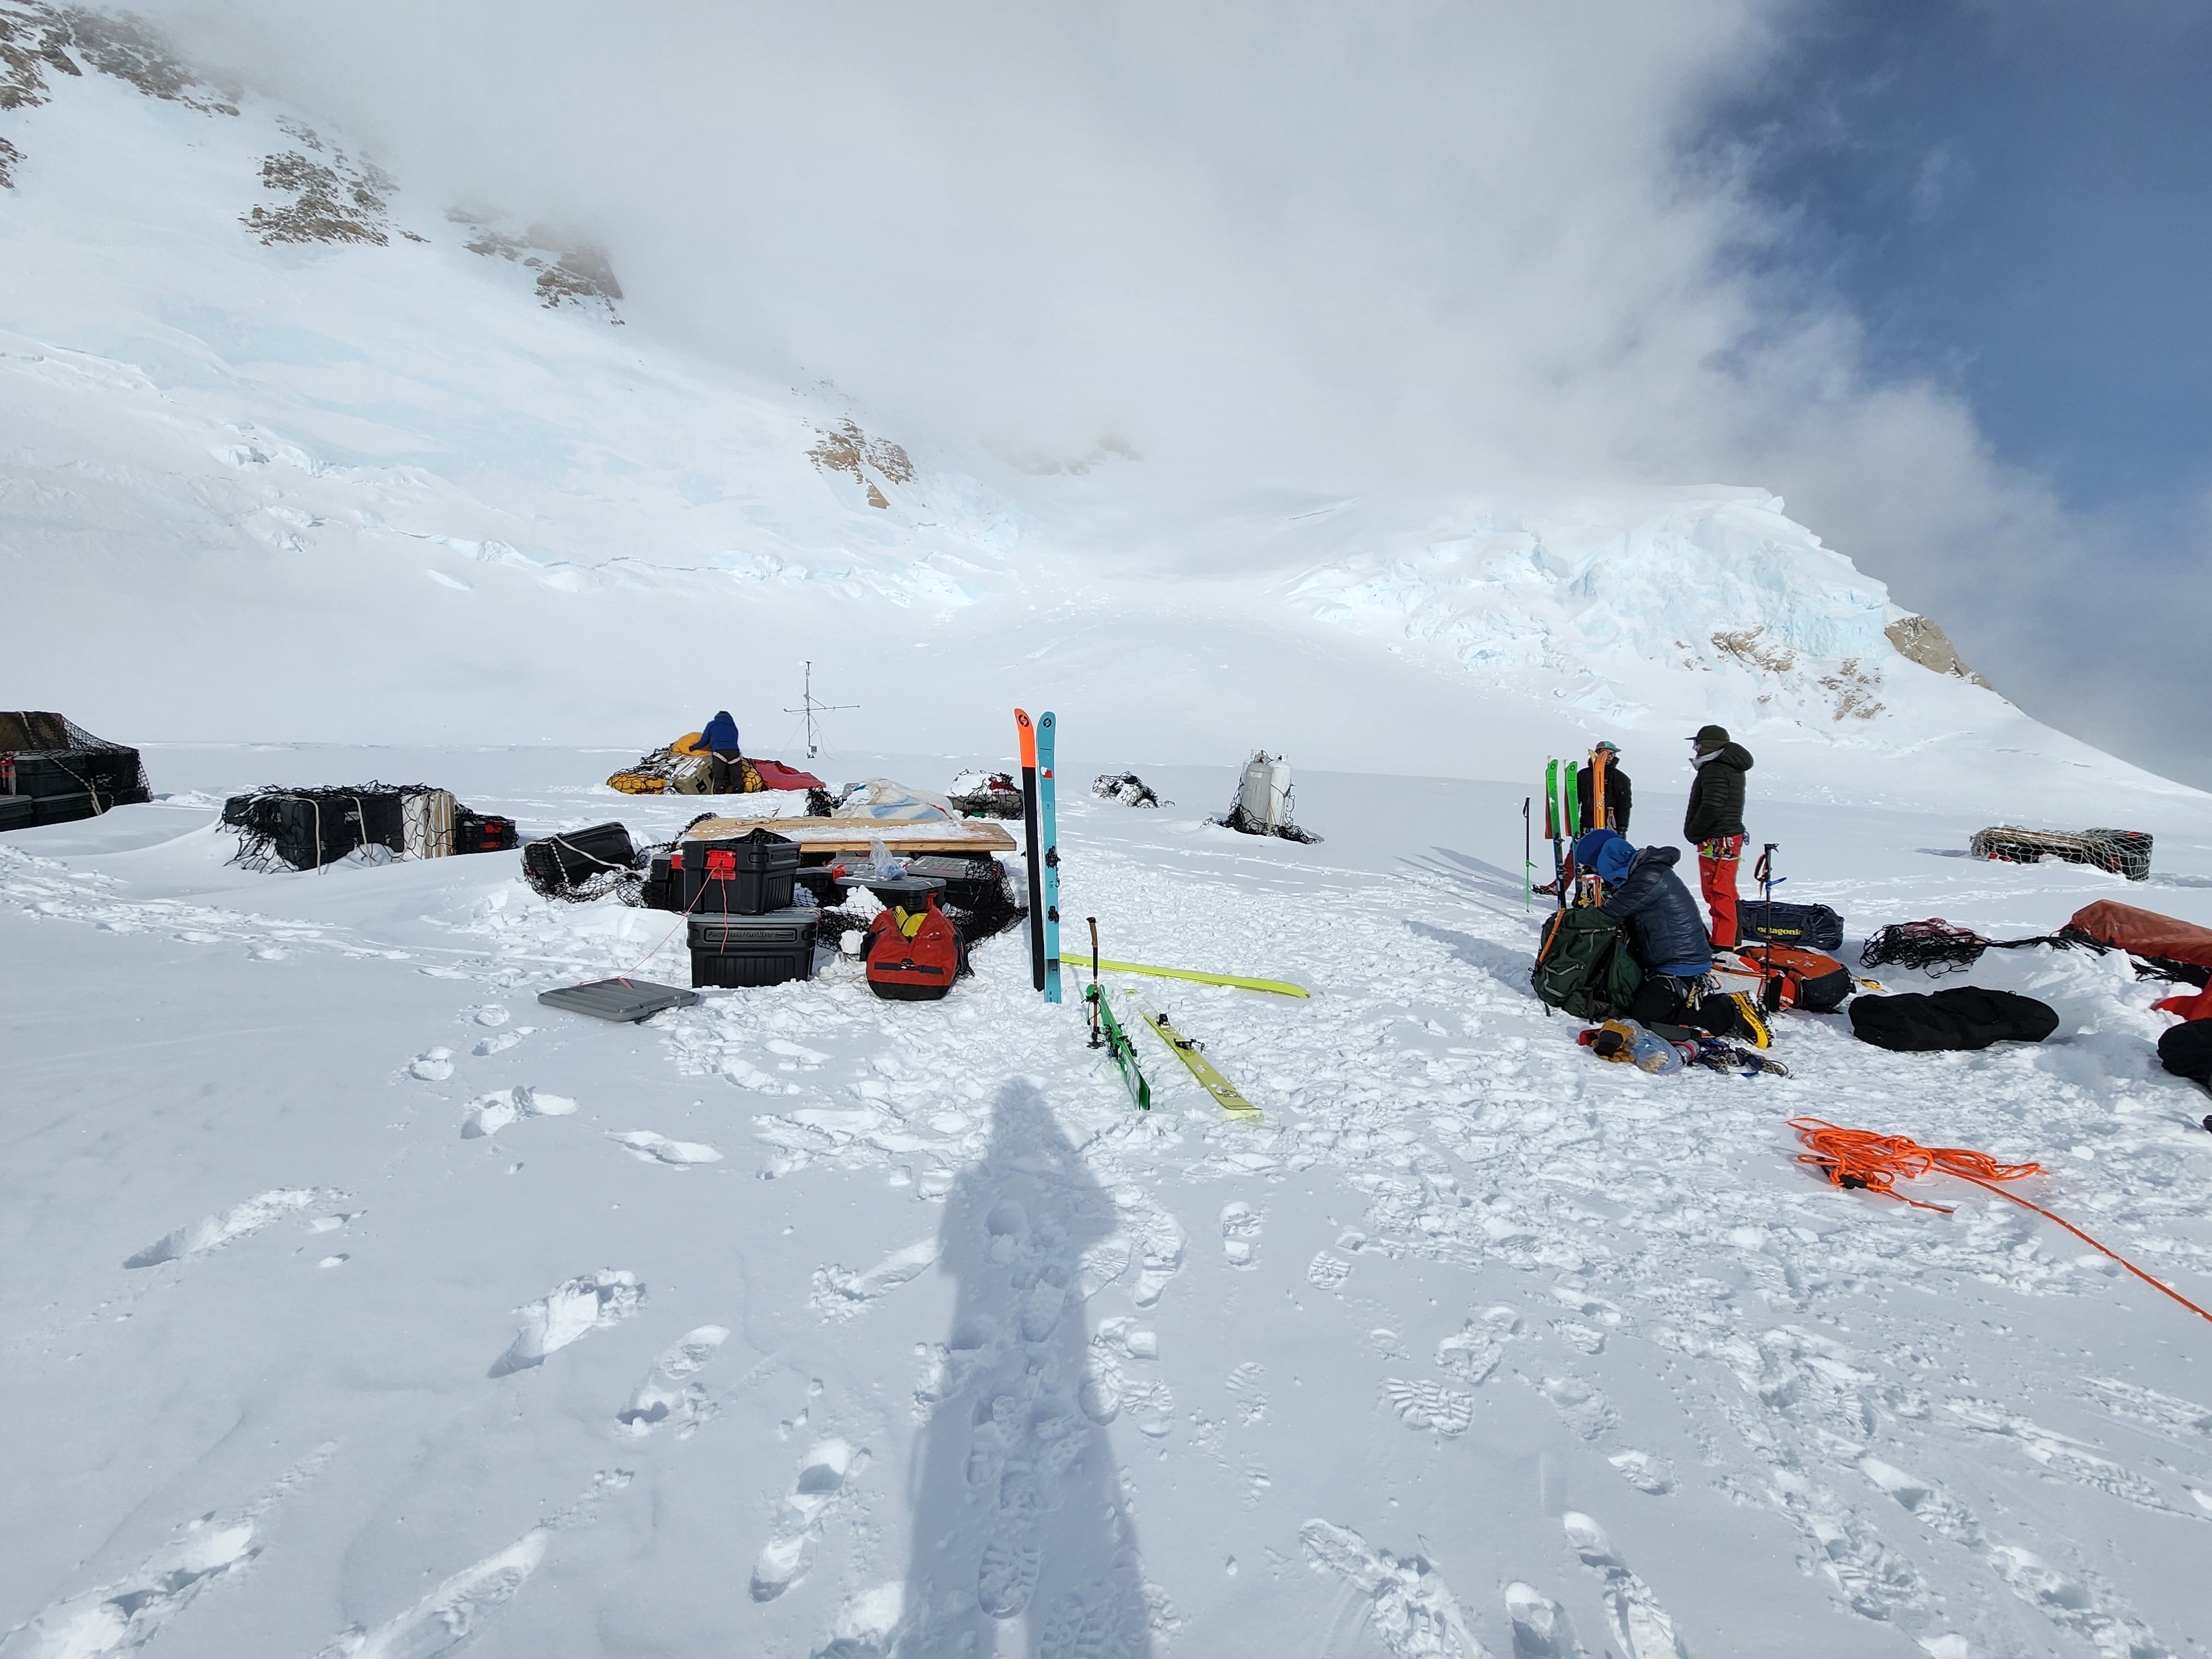 A snowy glacier covered with random piles of plastic storage boxes, duffel bags, and skis